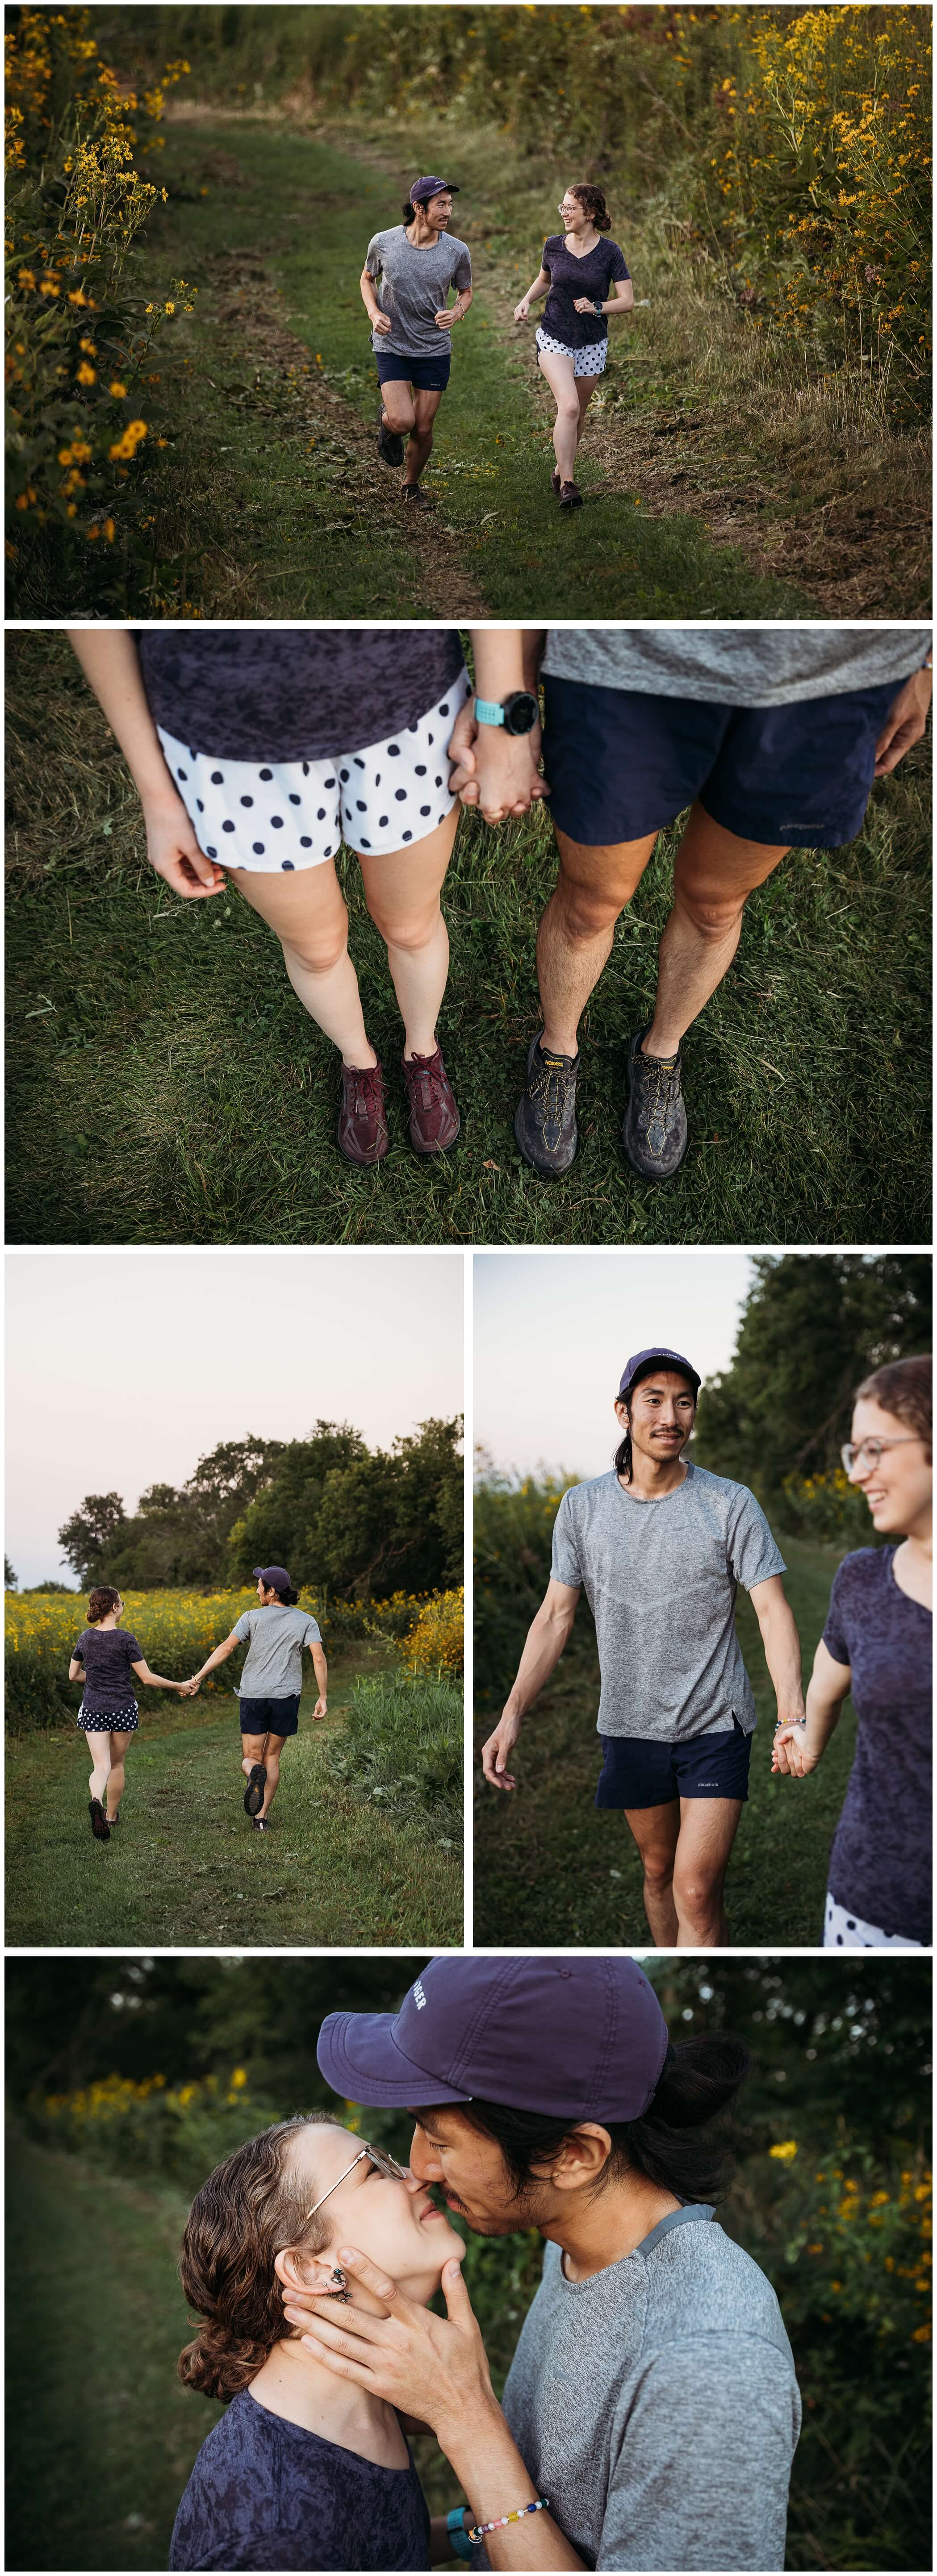 outdoor trail running engagement photos for an adventurous couple